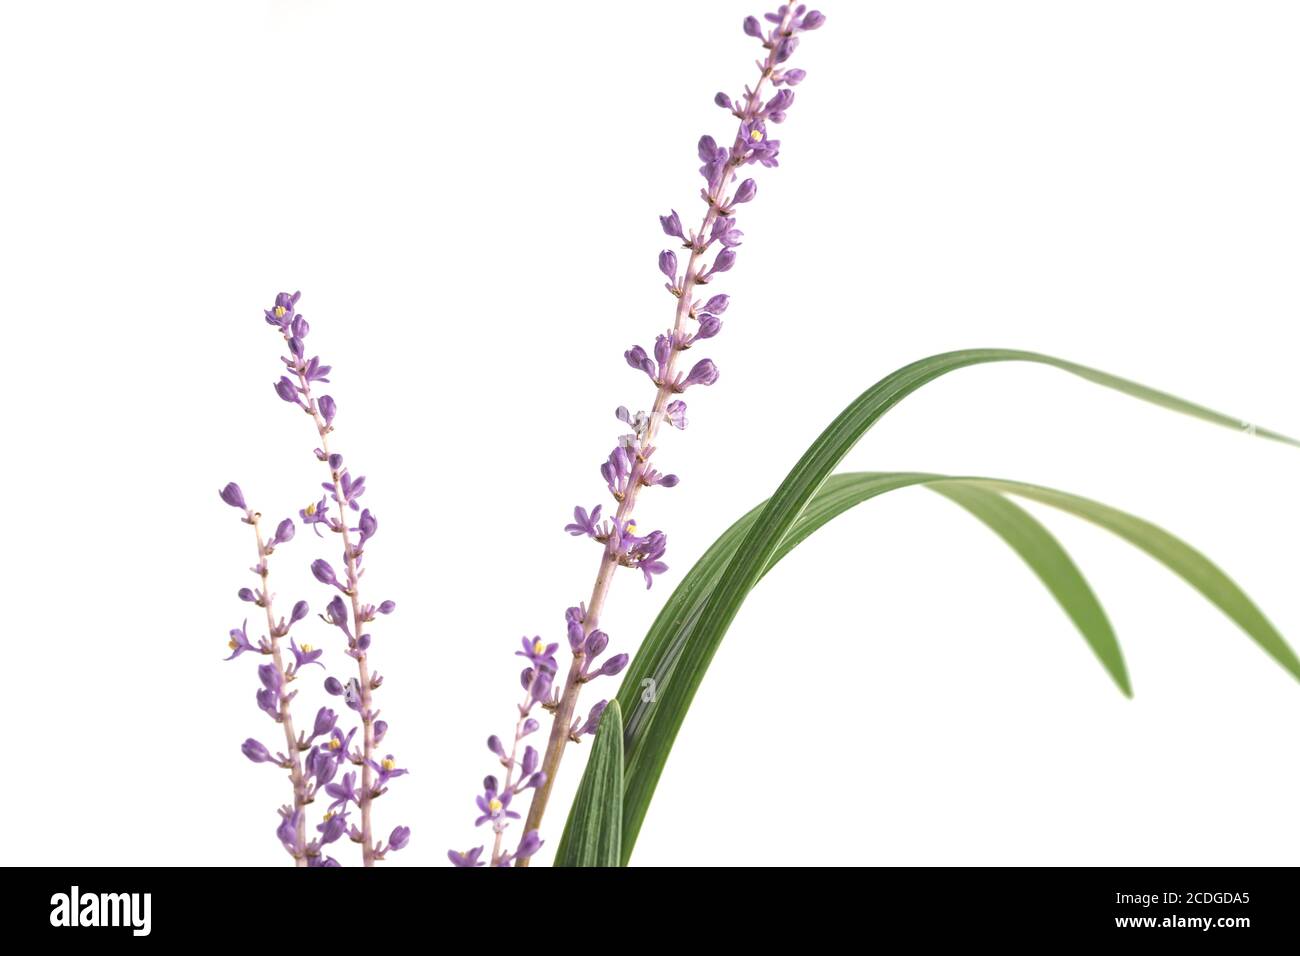 In summer, in the garden in August, Korea, Liriope platyphylla has a long stick-like flower bed with many small, pretty purple flowers. Stock Photo